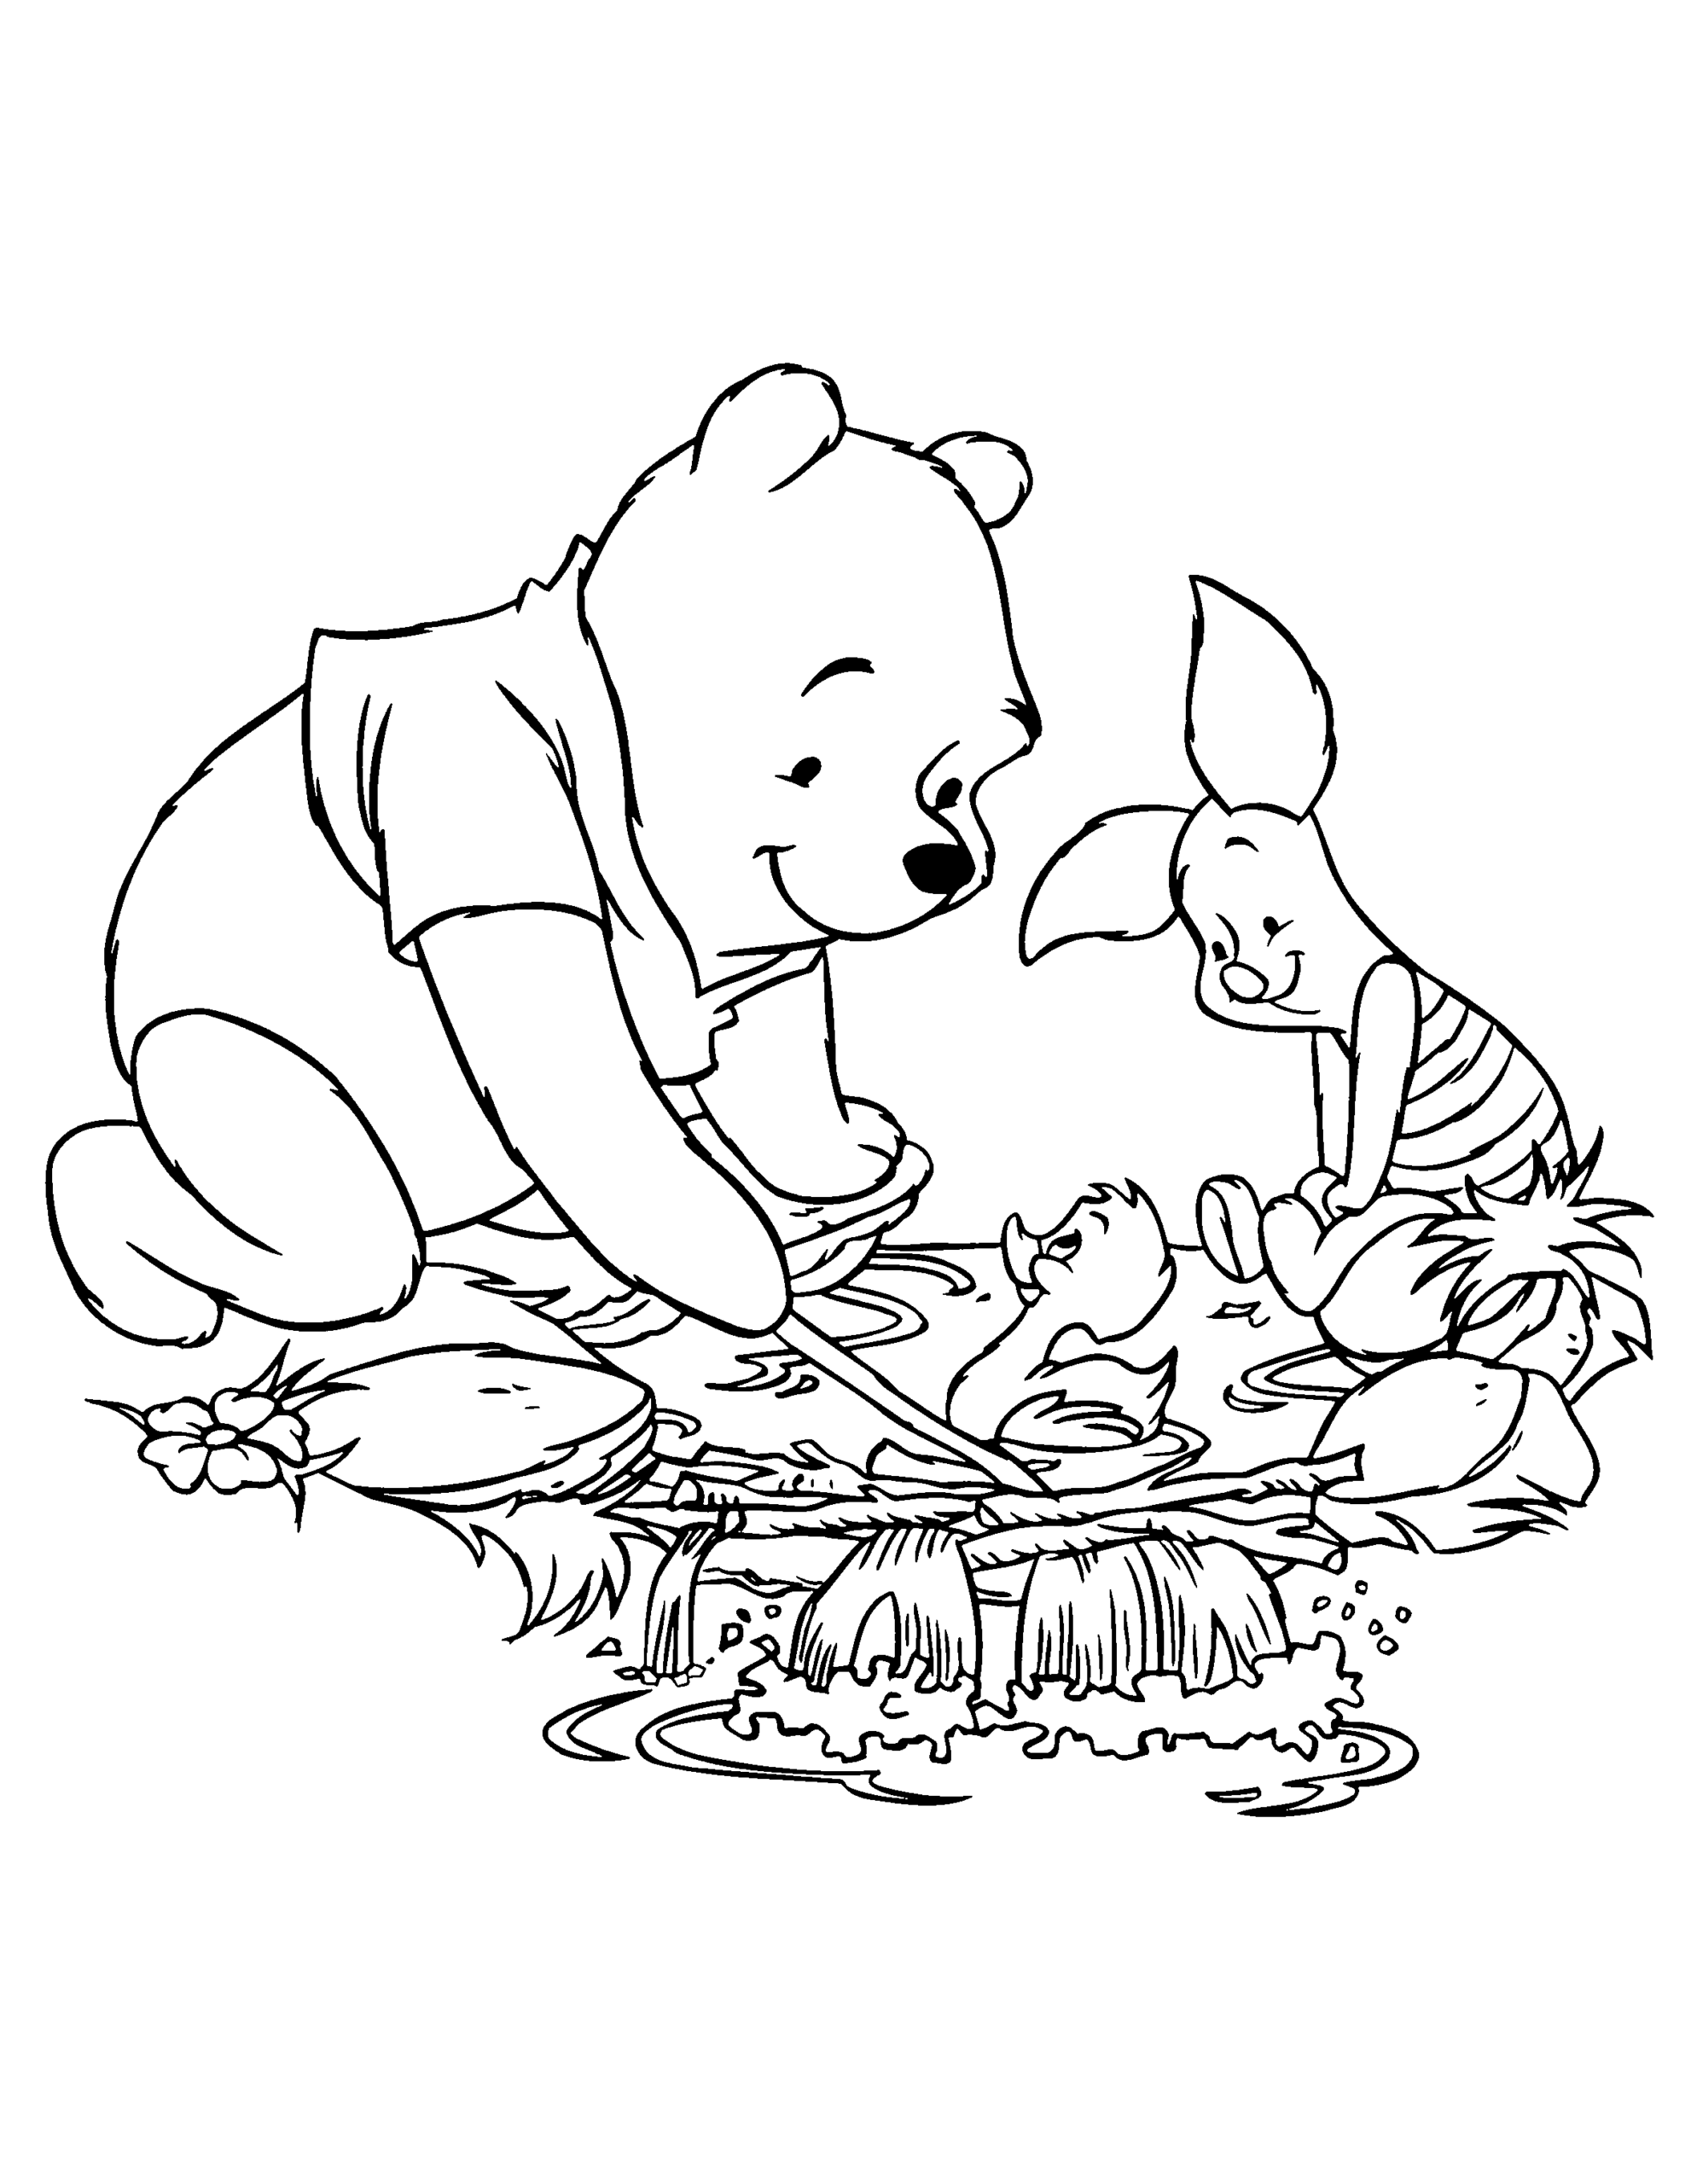 Winnie the Pooh Coloring Pages Cartoons winnie the pooh 45 Printable 2020 7154 Coloring4free